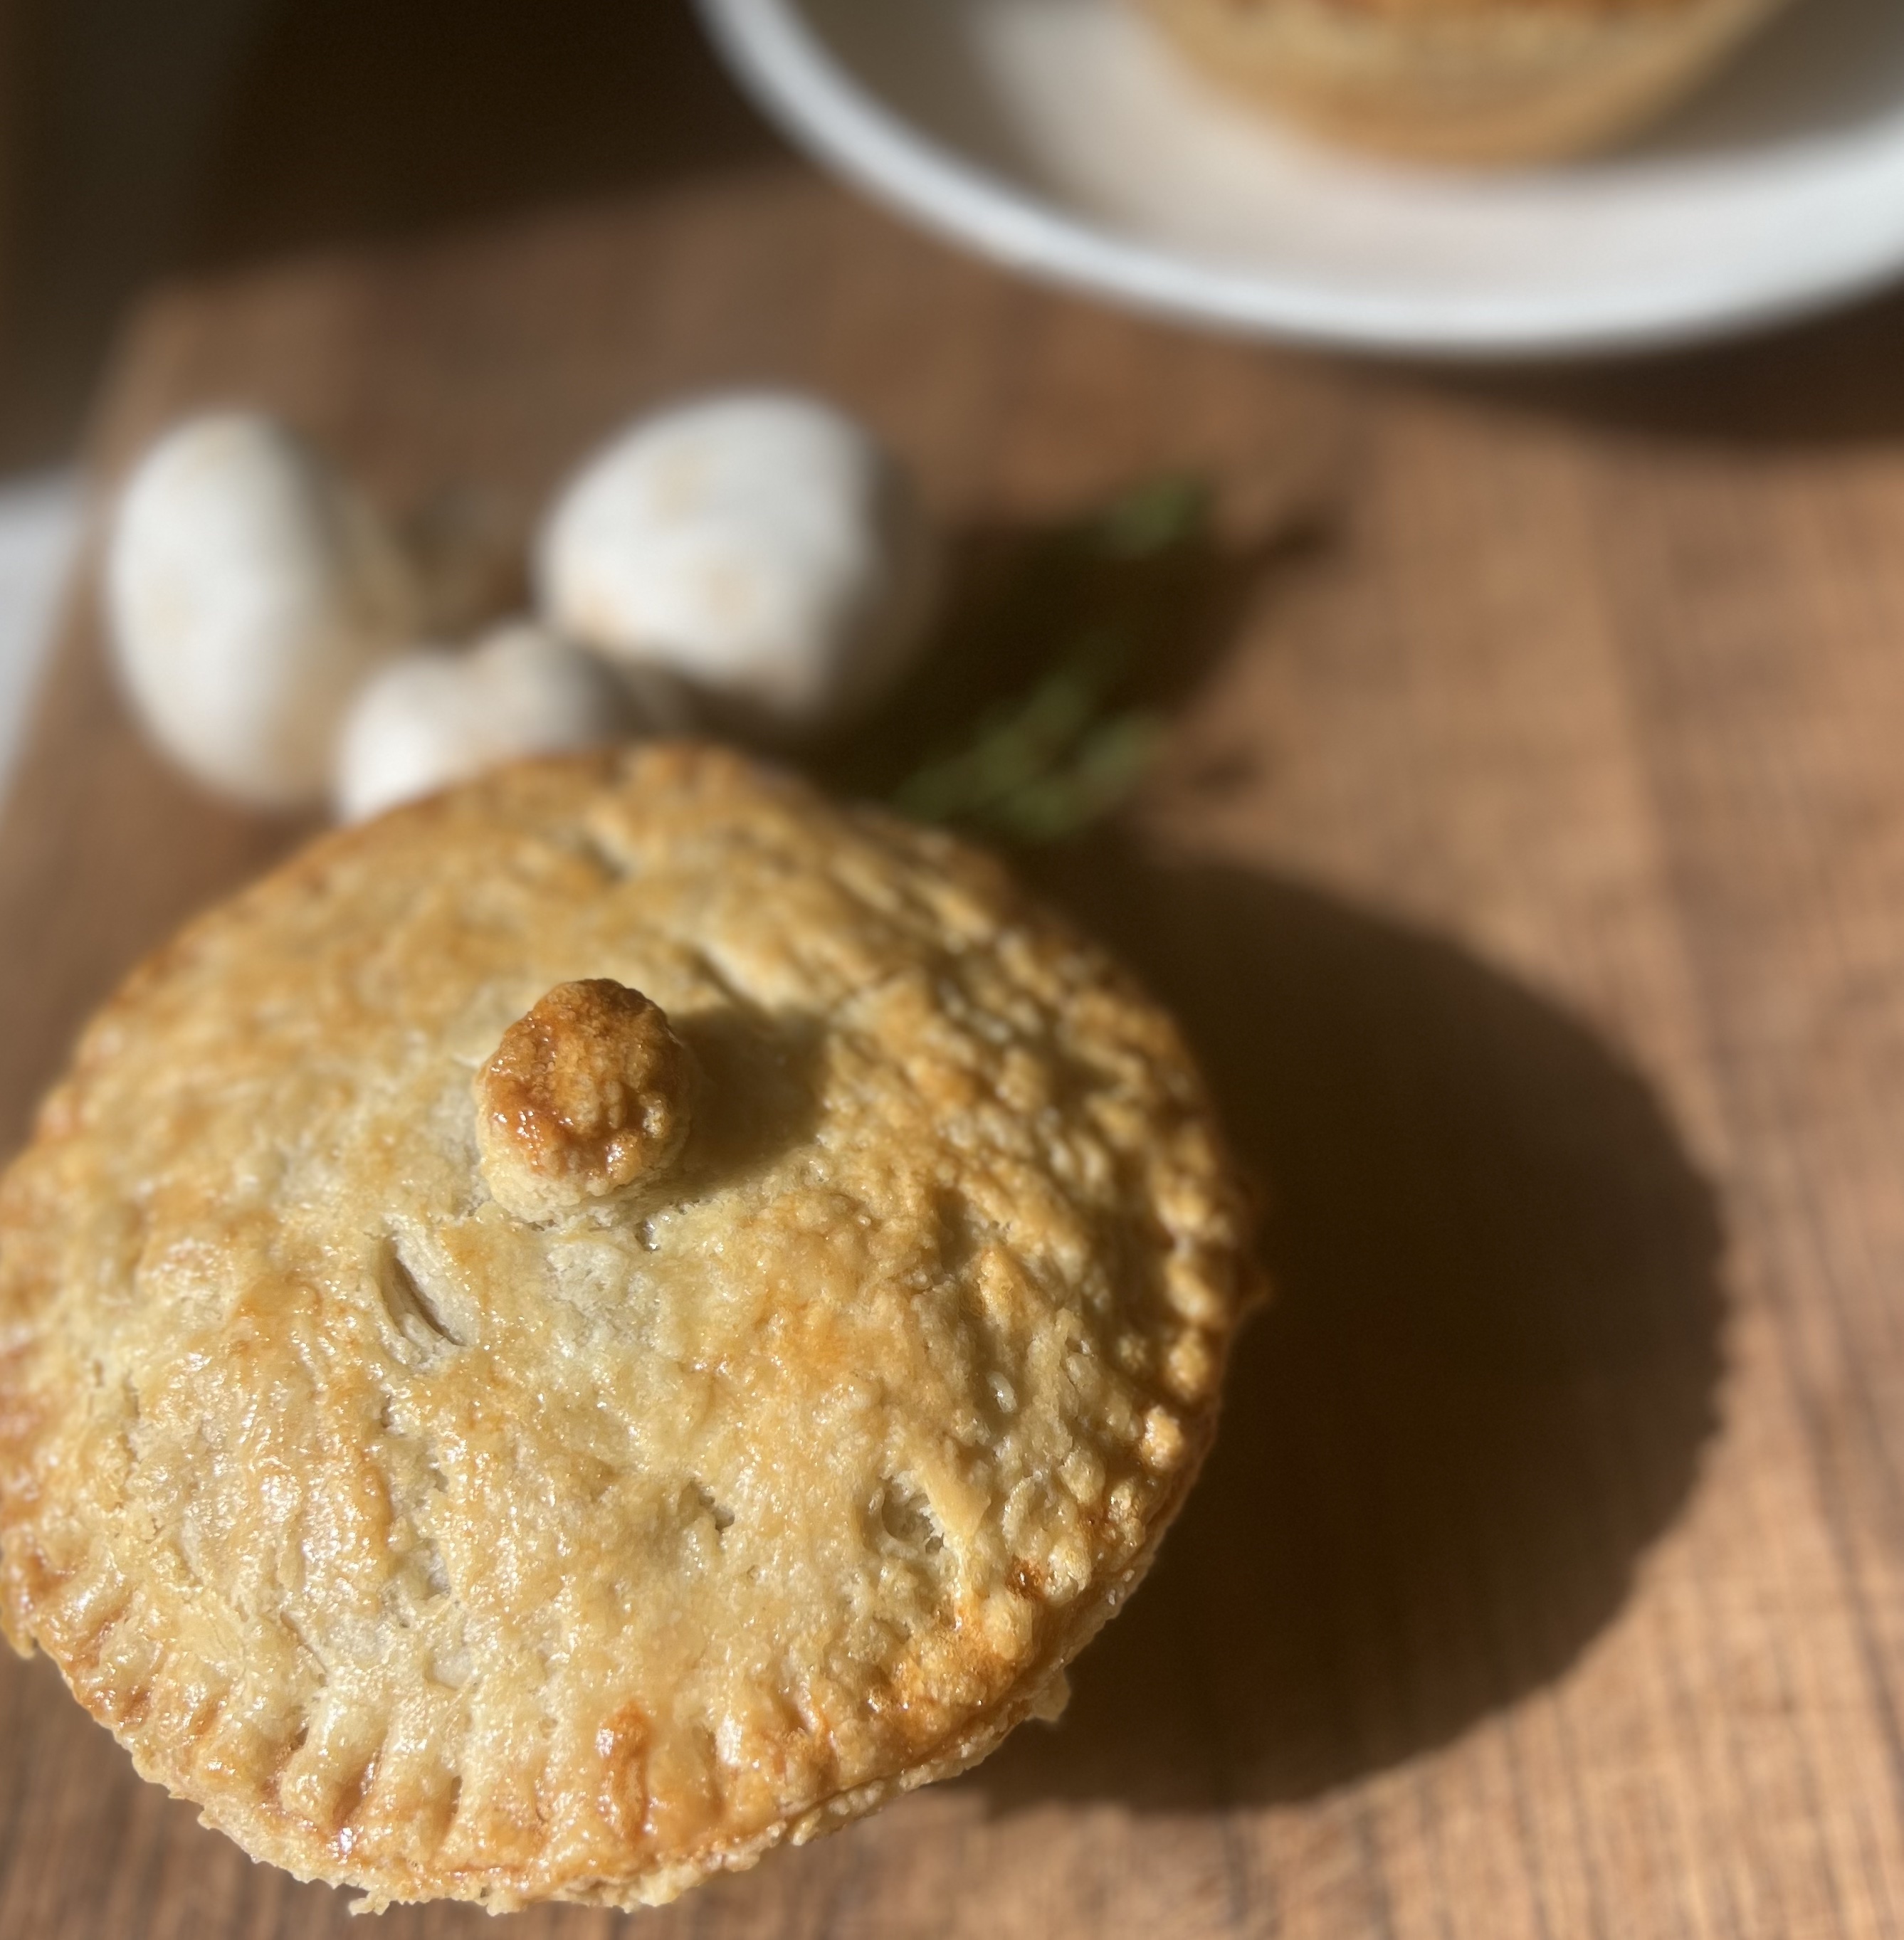 Derek Blaquiere is affectionately becoming known as the Pie Man. And he is introducing people to the savory world of England and Australia, one pie at a time at Tucker Pie Co. This is a chicken and mushroom pie.